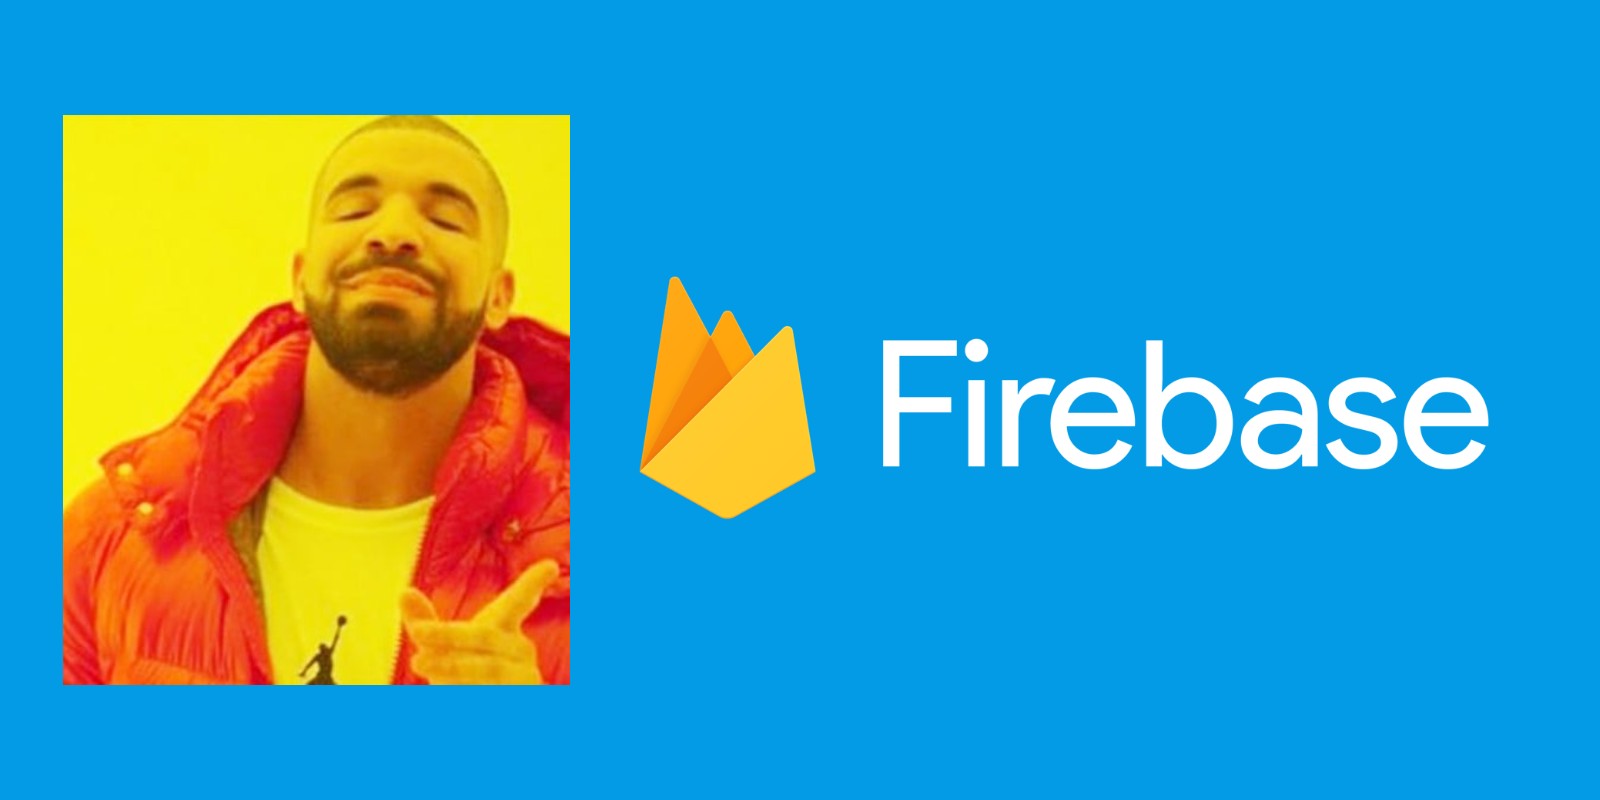 Let's discuss what Google Firebase has to offer for app development in 2019.